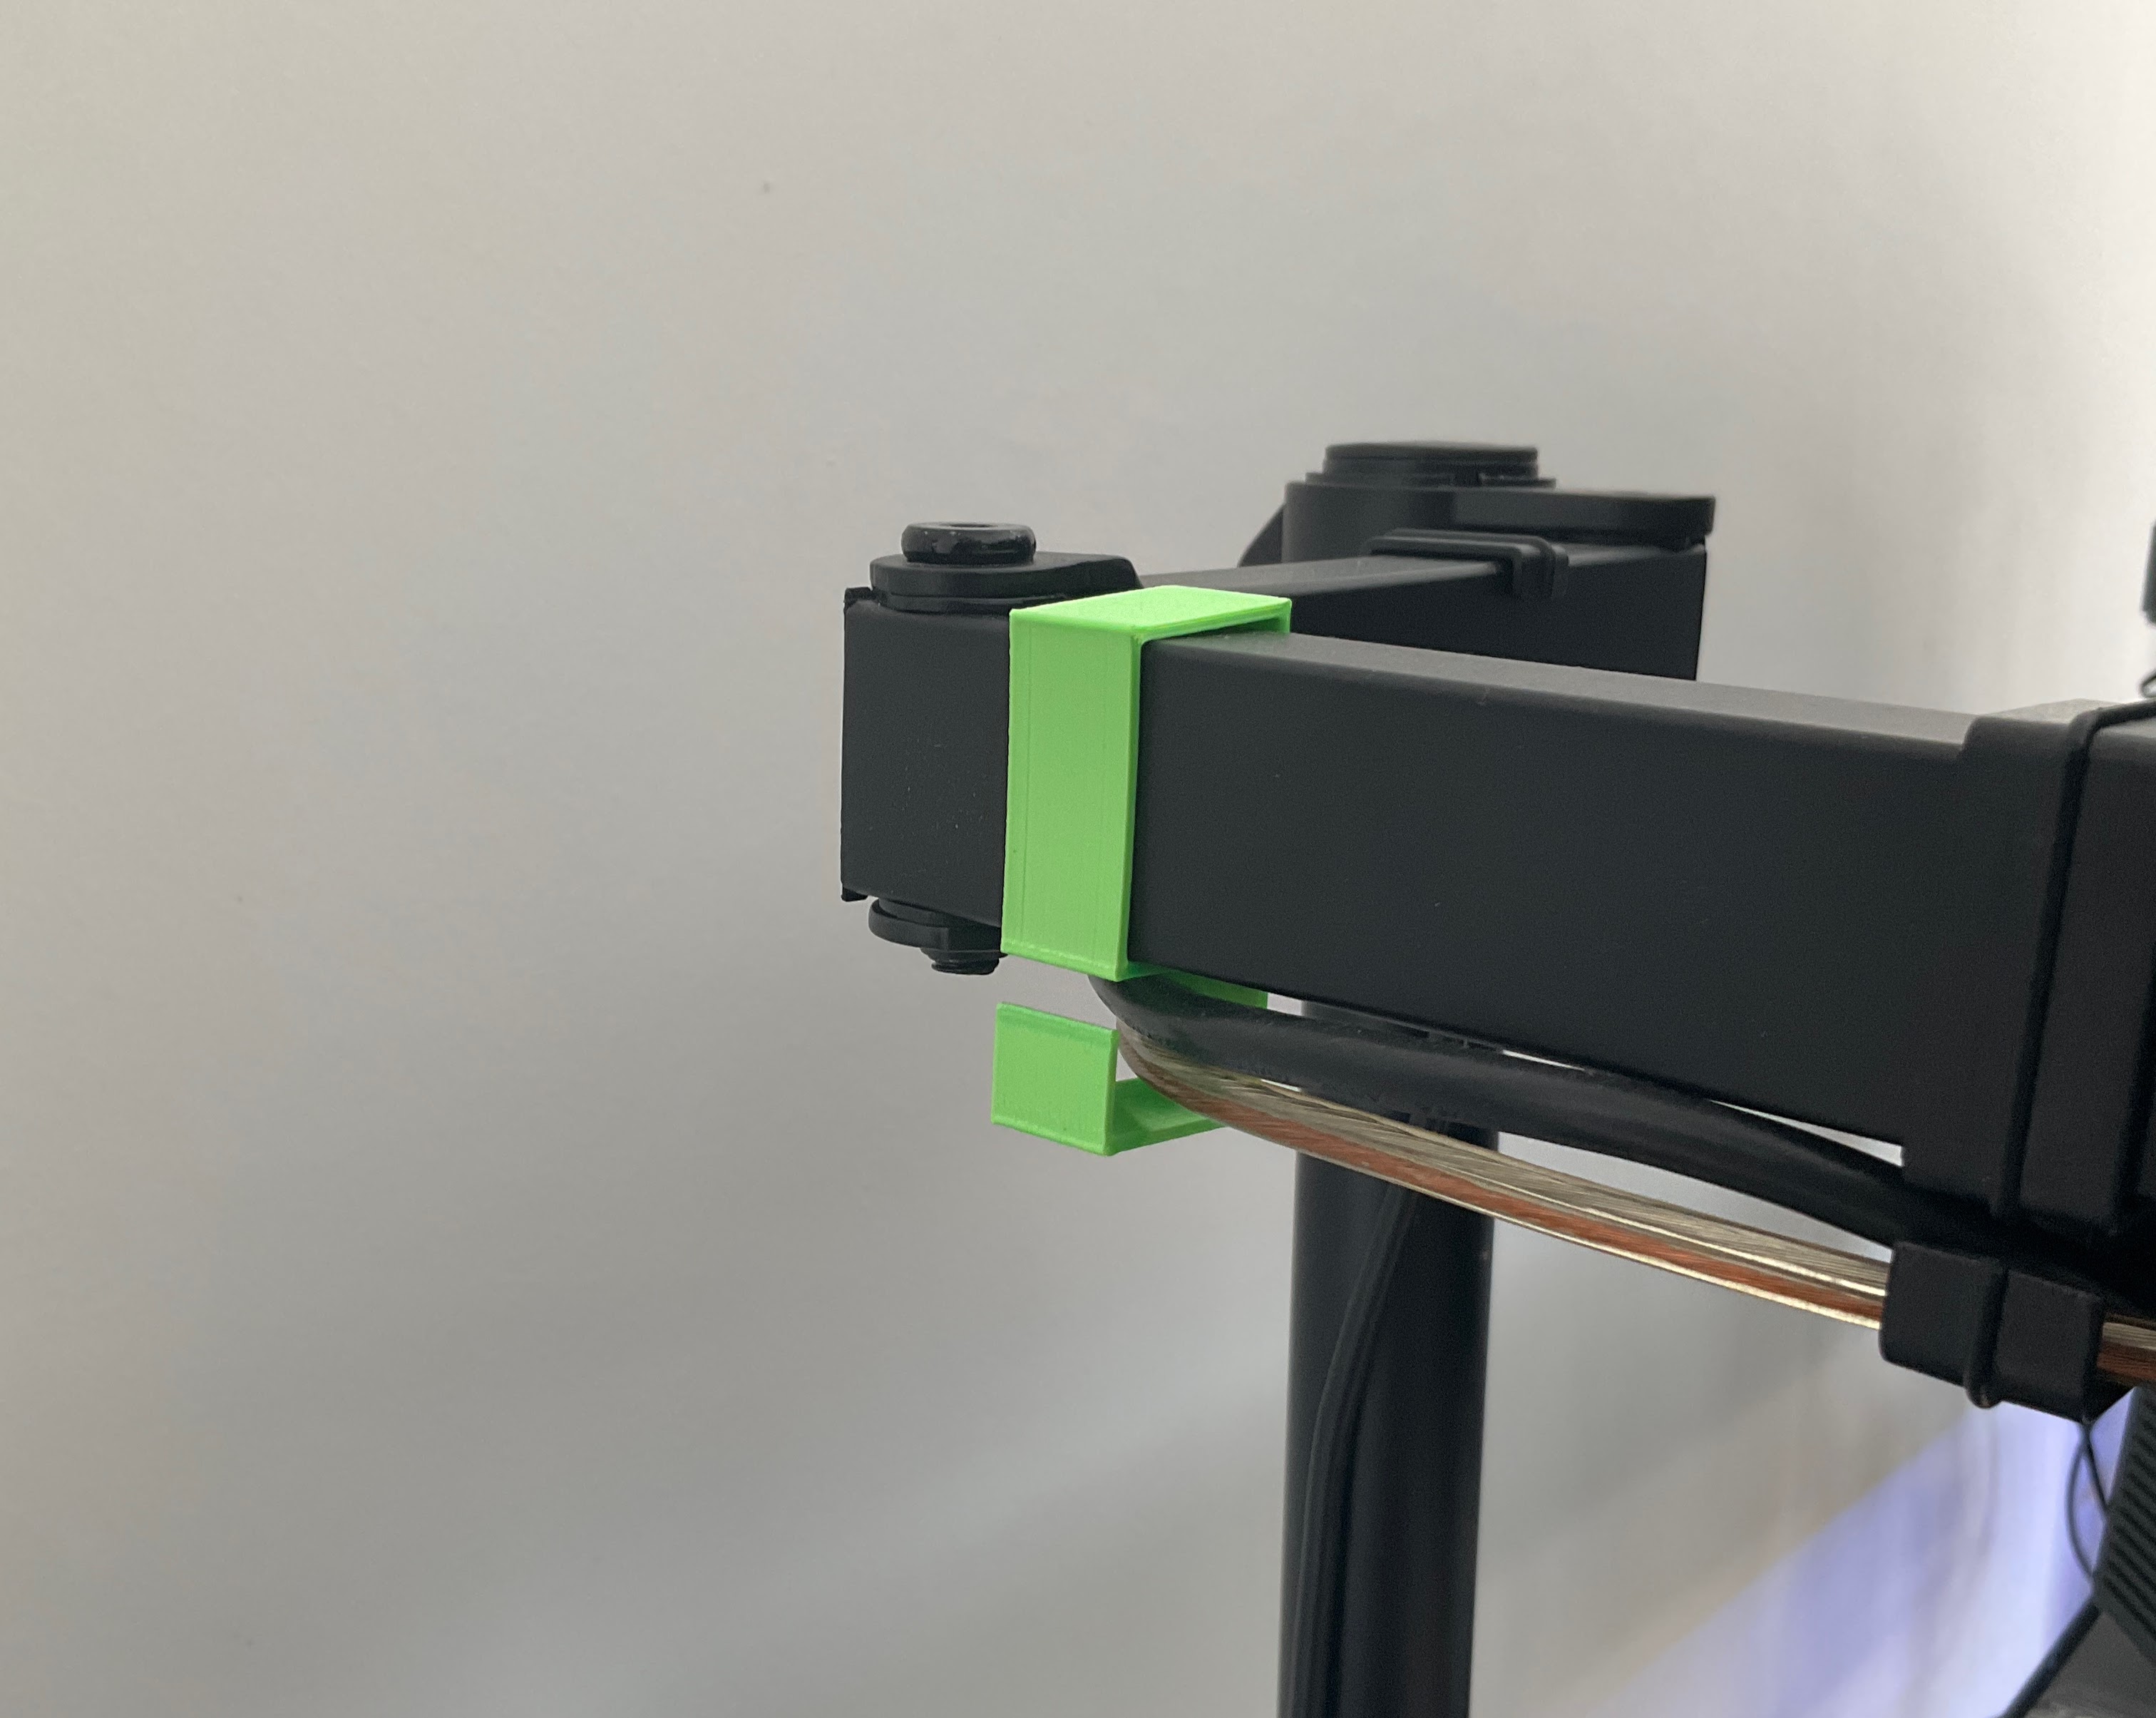 An image of the clamp on my monitor arm